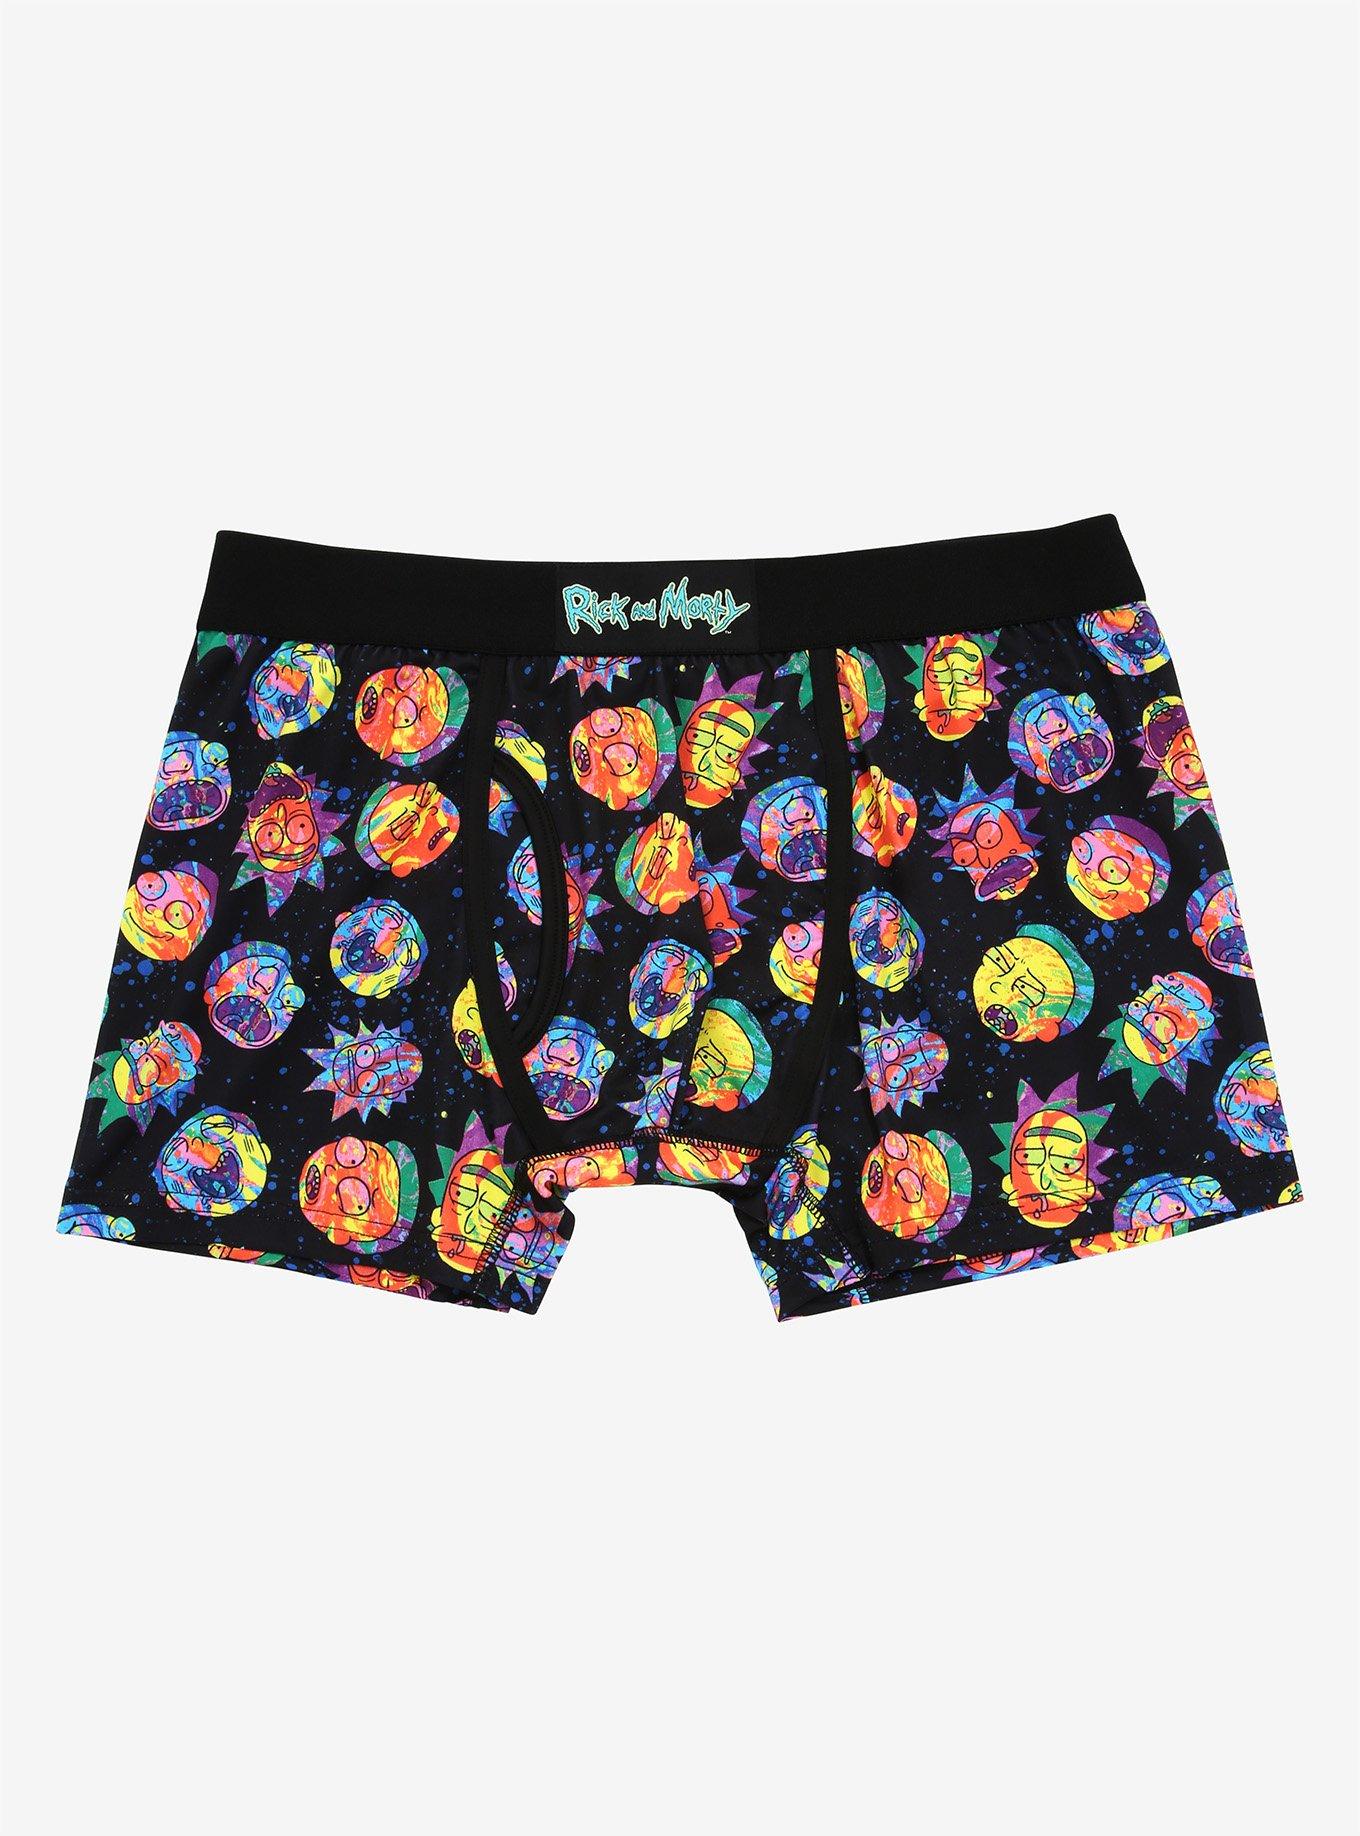 Rick and Morty Colorful Faces Boxer Briefs - BoxLunch Exclusive | BoxLunch